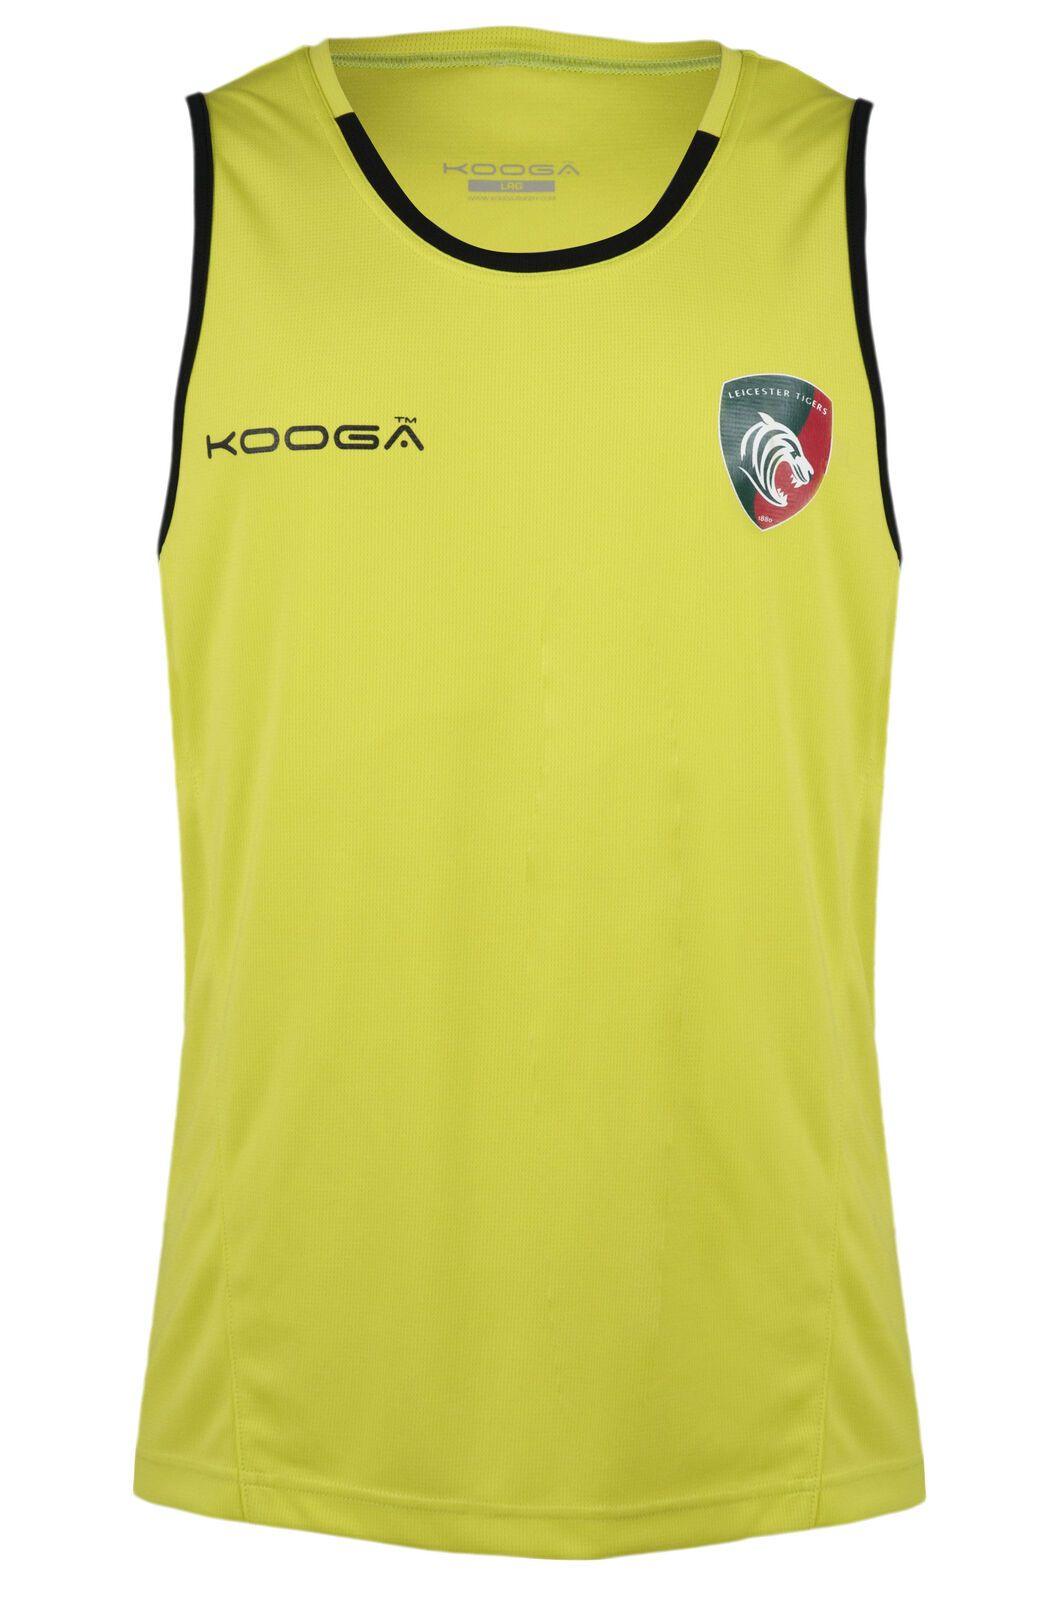 Rugby Heaven Kooga Leicester Tigers Gym Vest Adults - www.rugby-heaven.co.uk